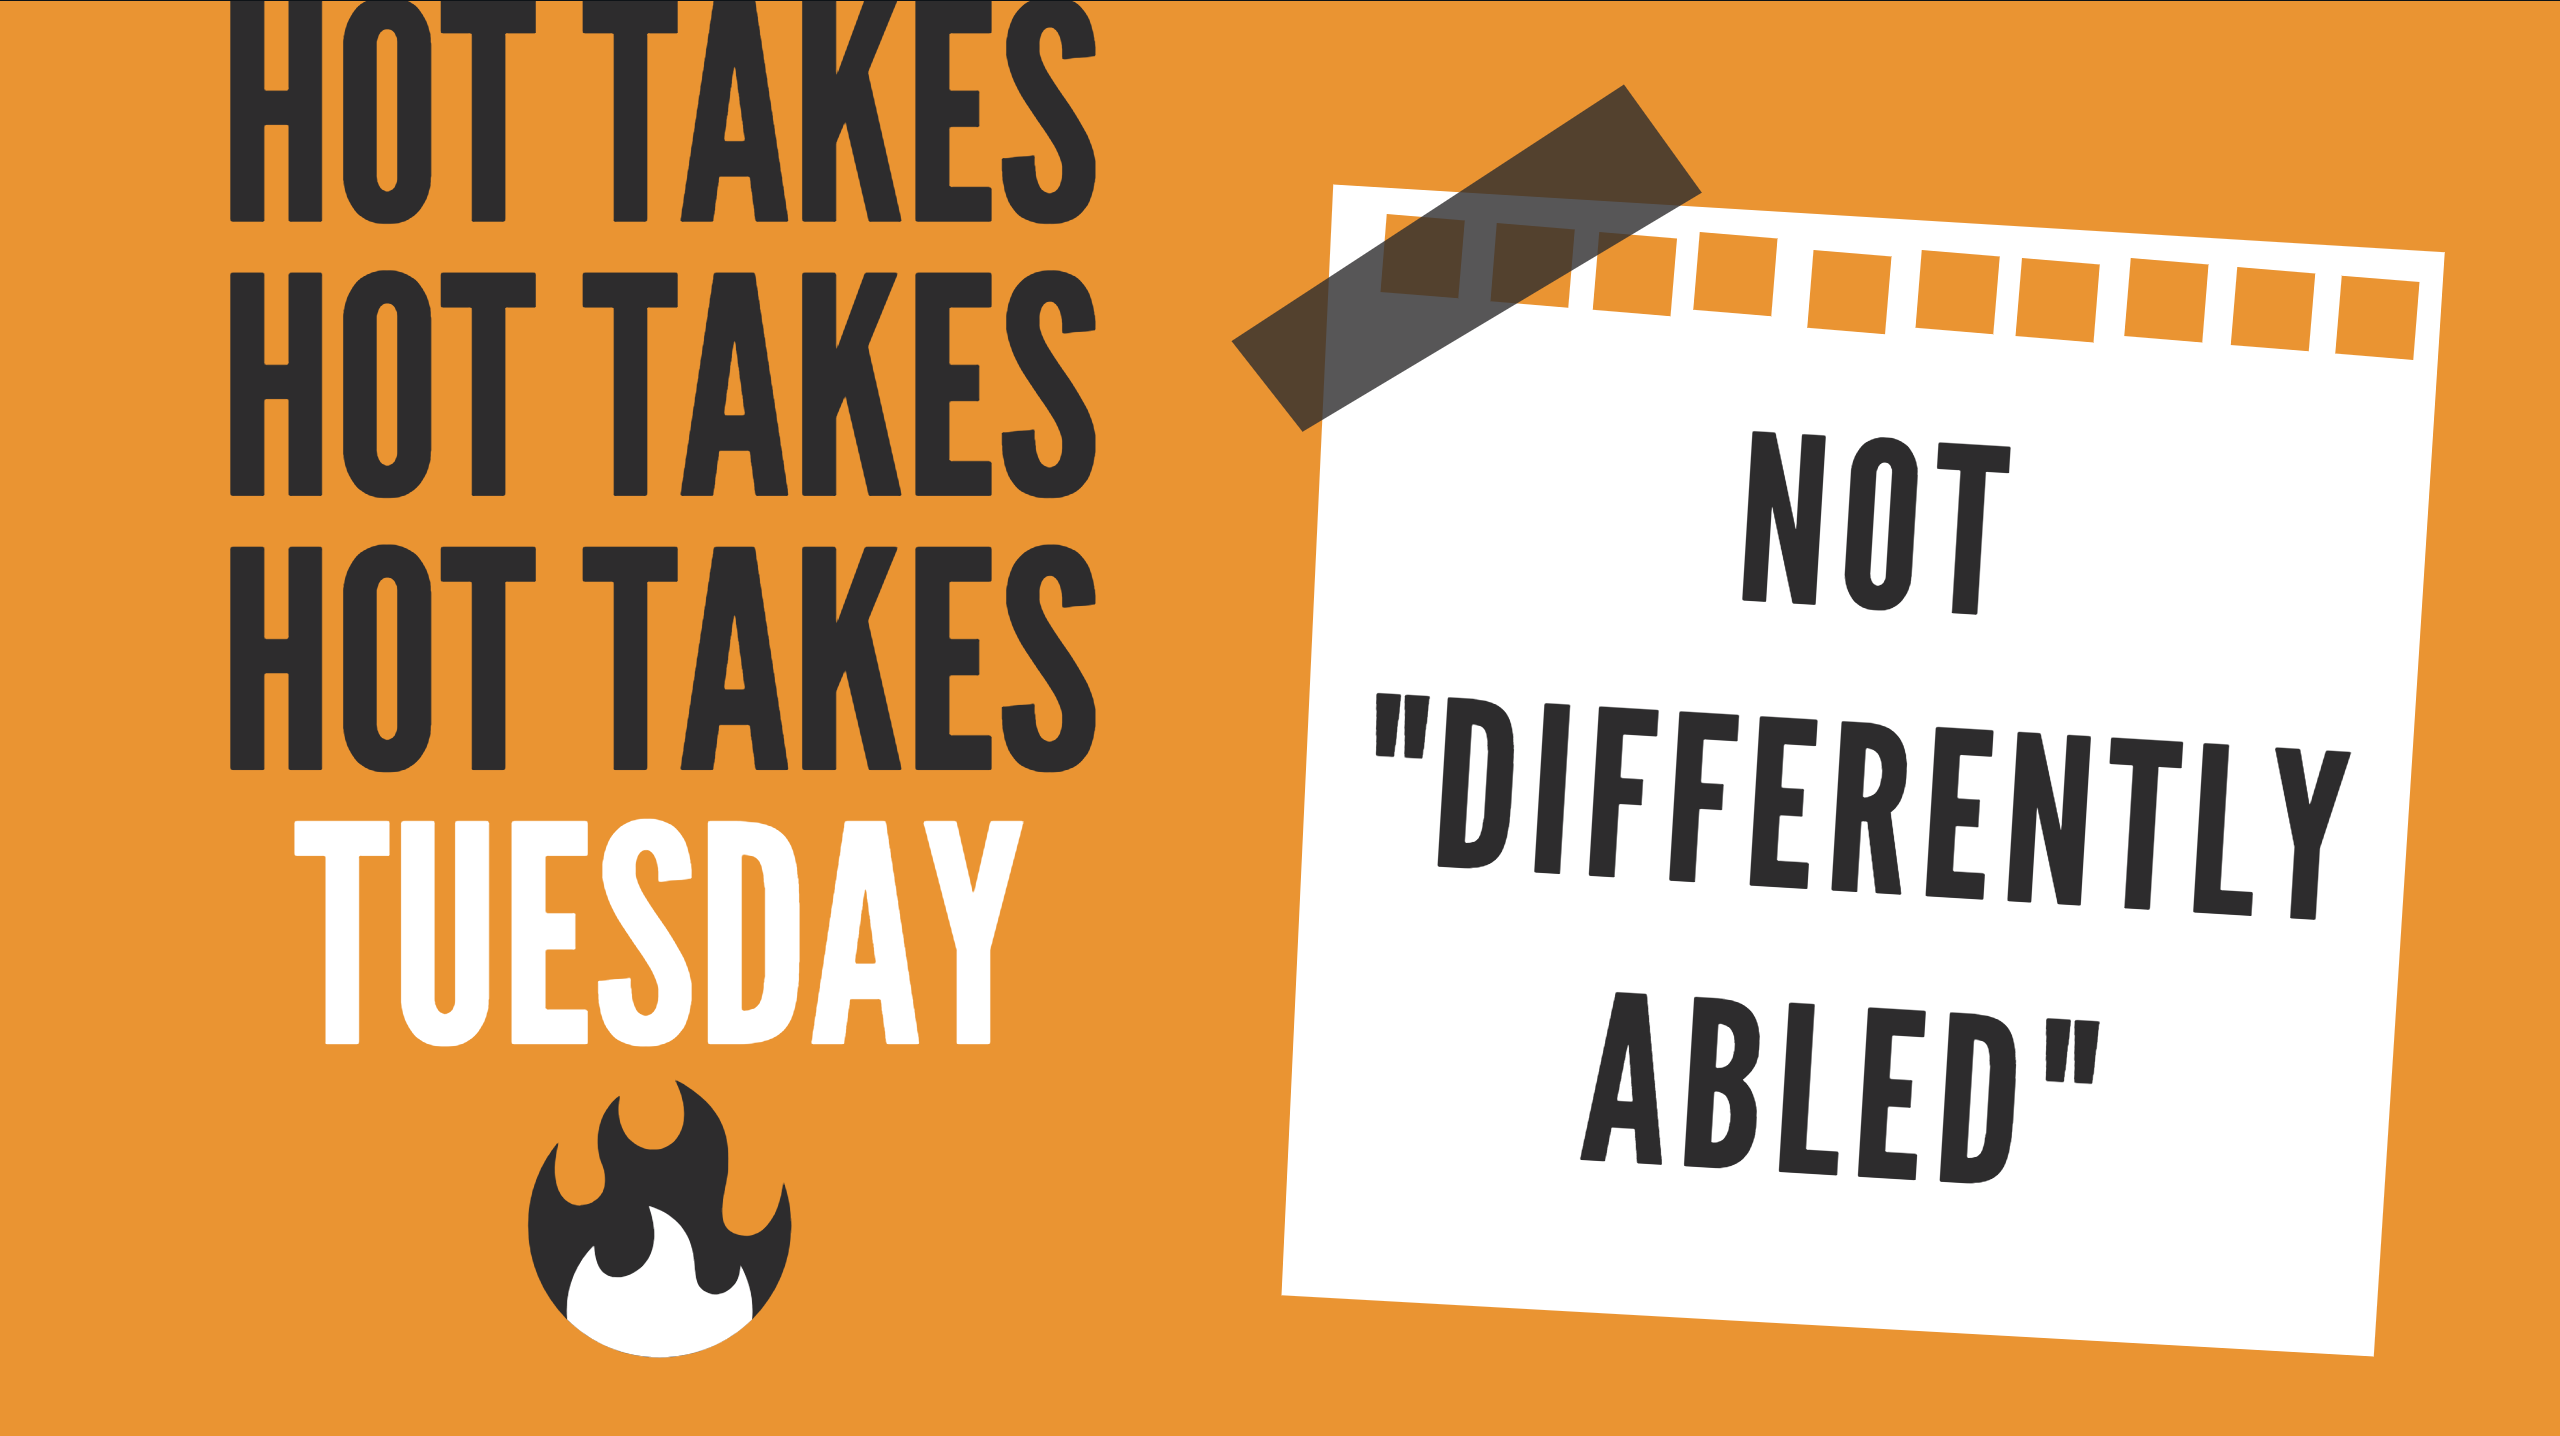 Hot Takes Tuesday, Not "Differently Abled"